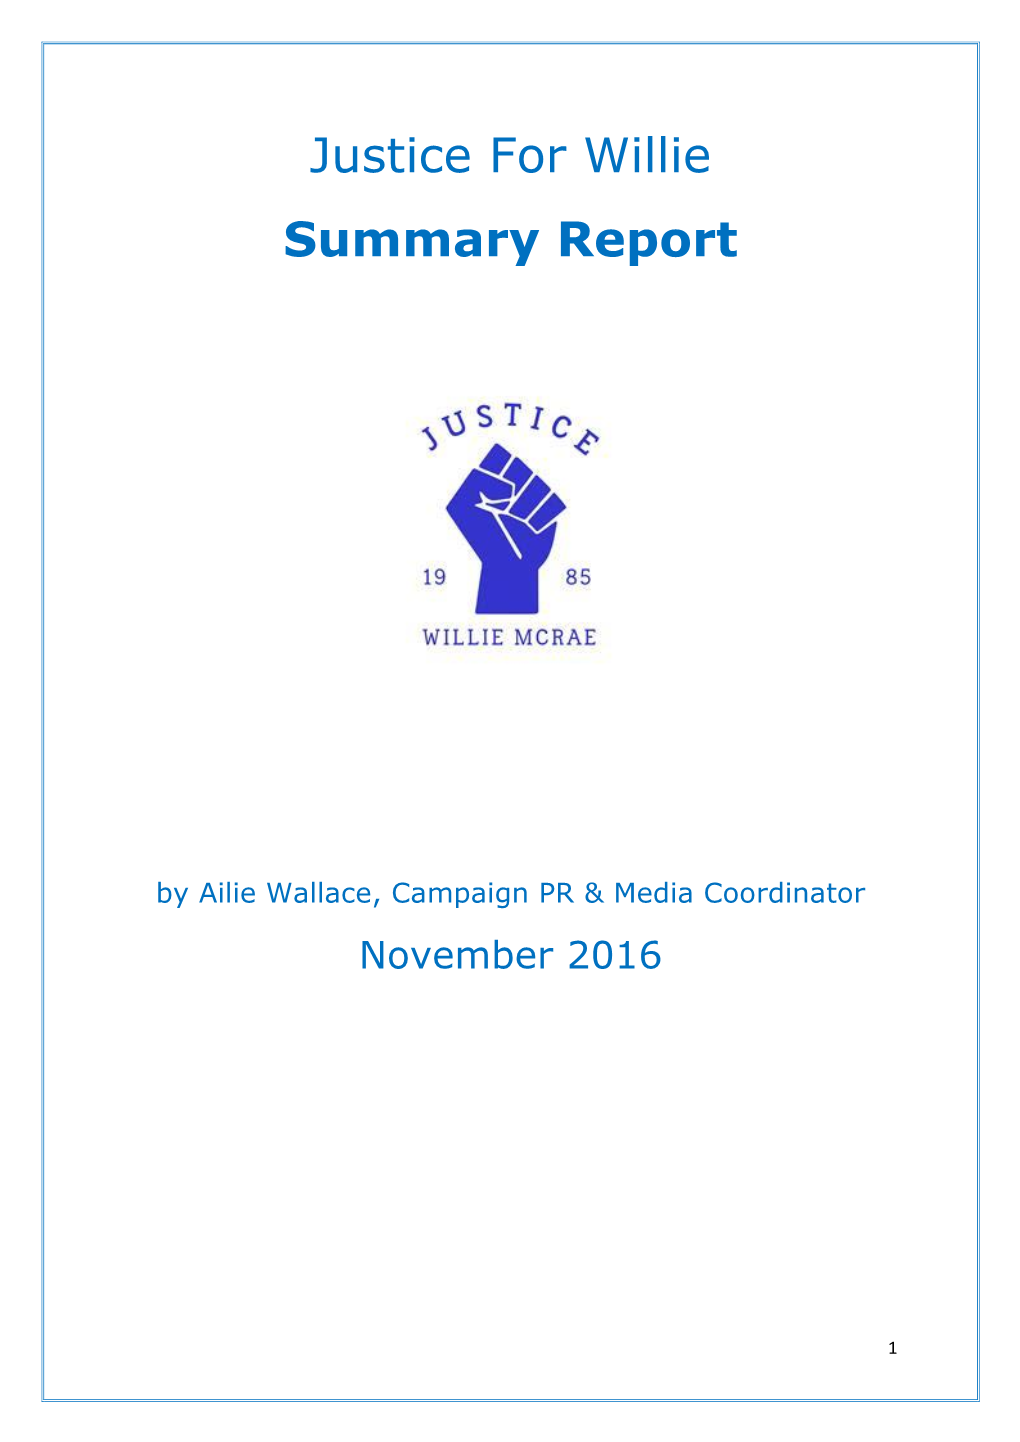 Justice for Willie Summary Report